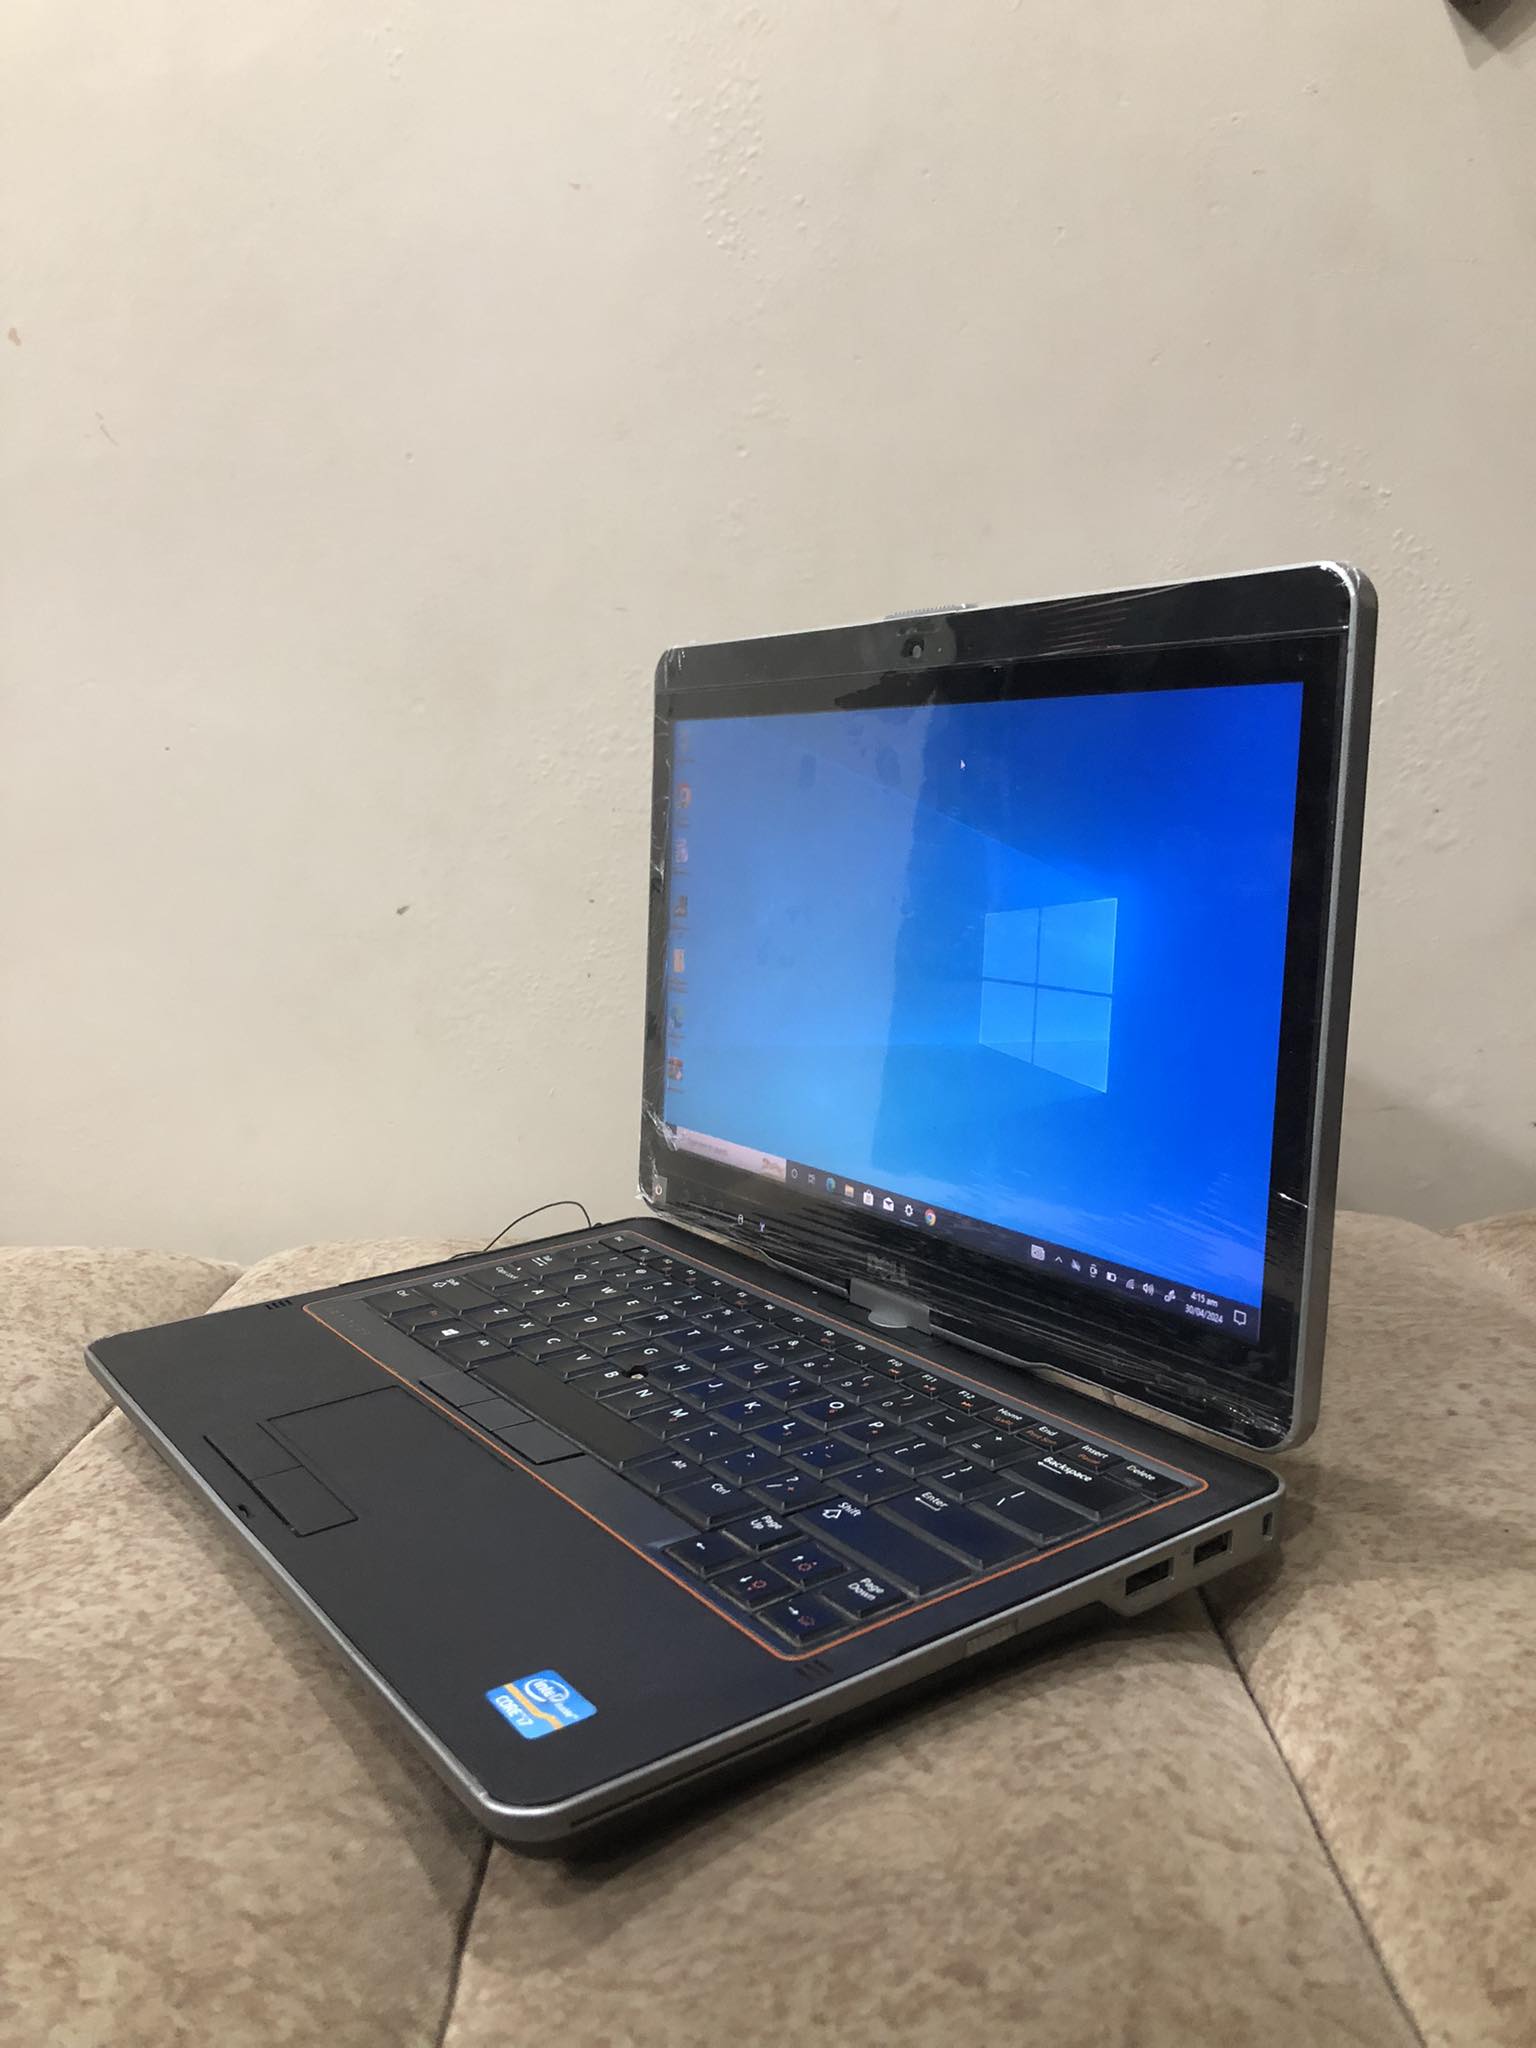 Dell Latitude XT3 Core i7 2nd Generation Blacklight Keyboard Touch Screen 360 Rotation Plus tab & Pen Awesome laptop